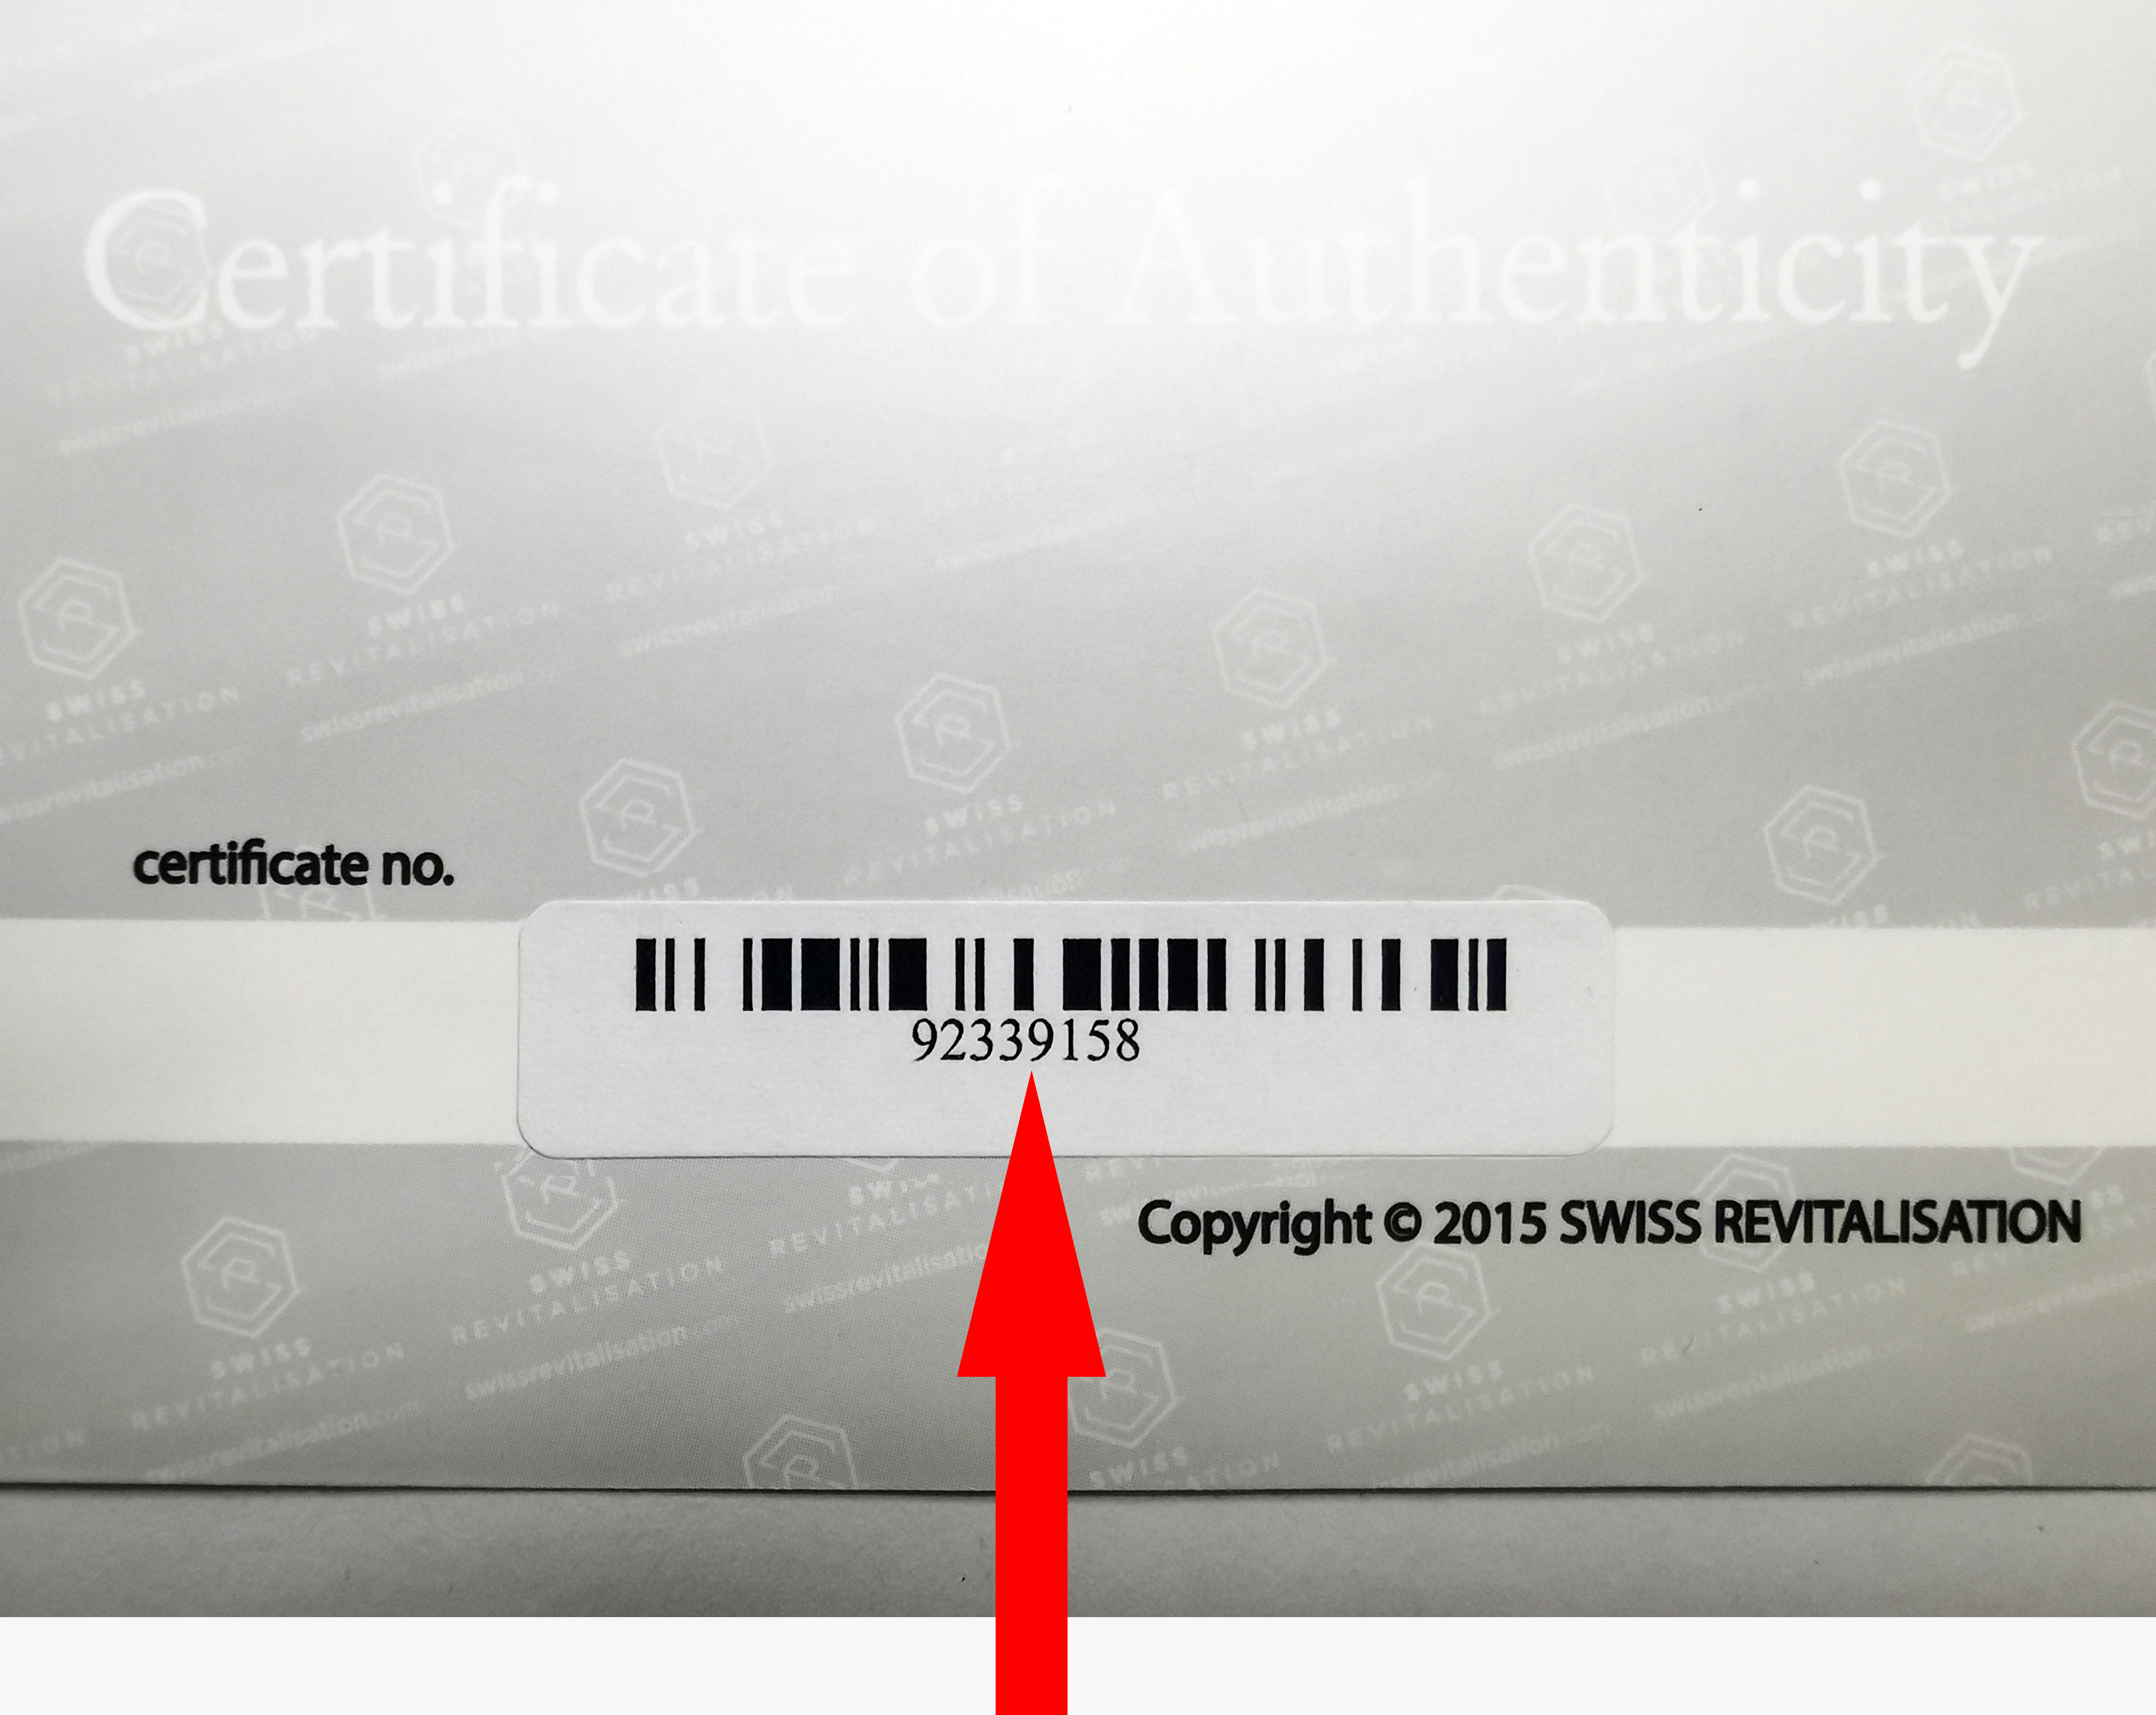 serial number on the Barcode Label